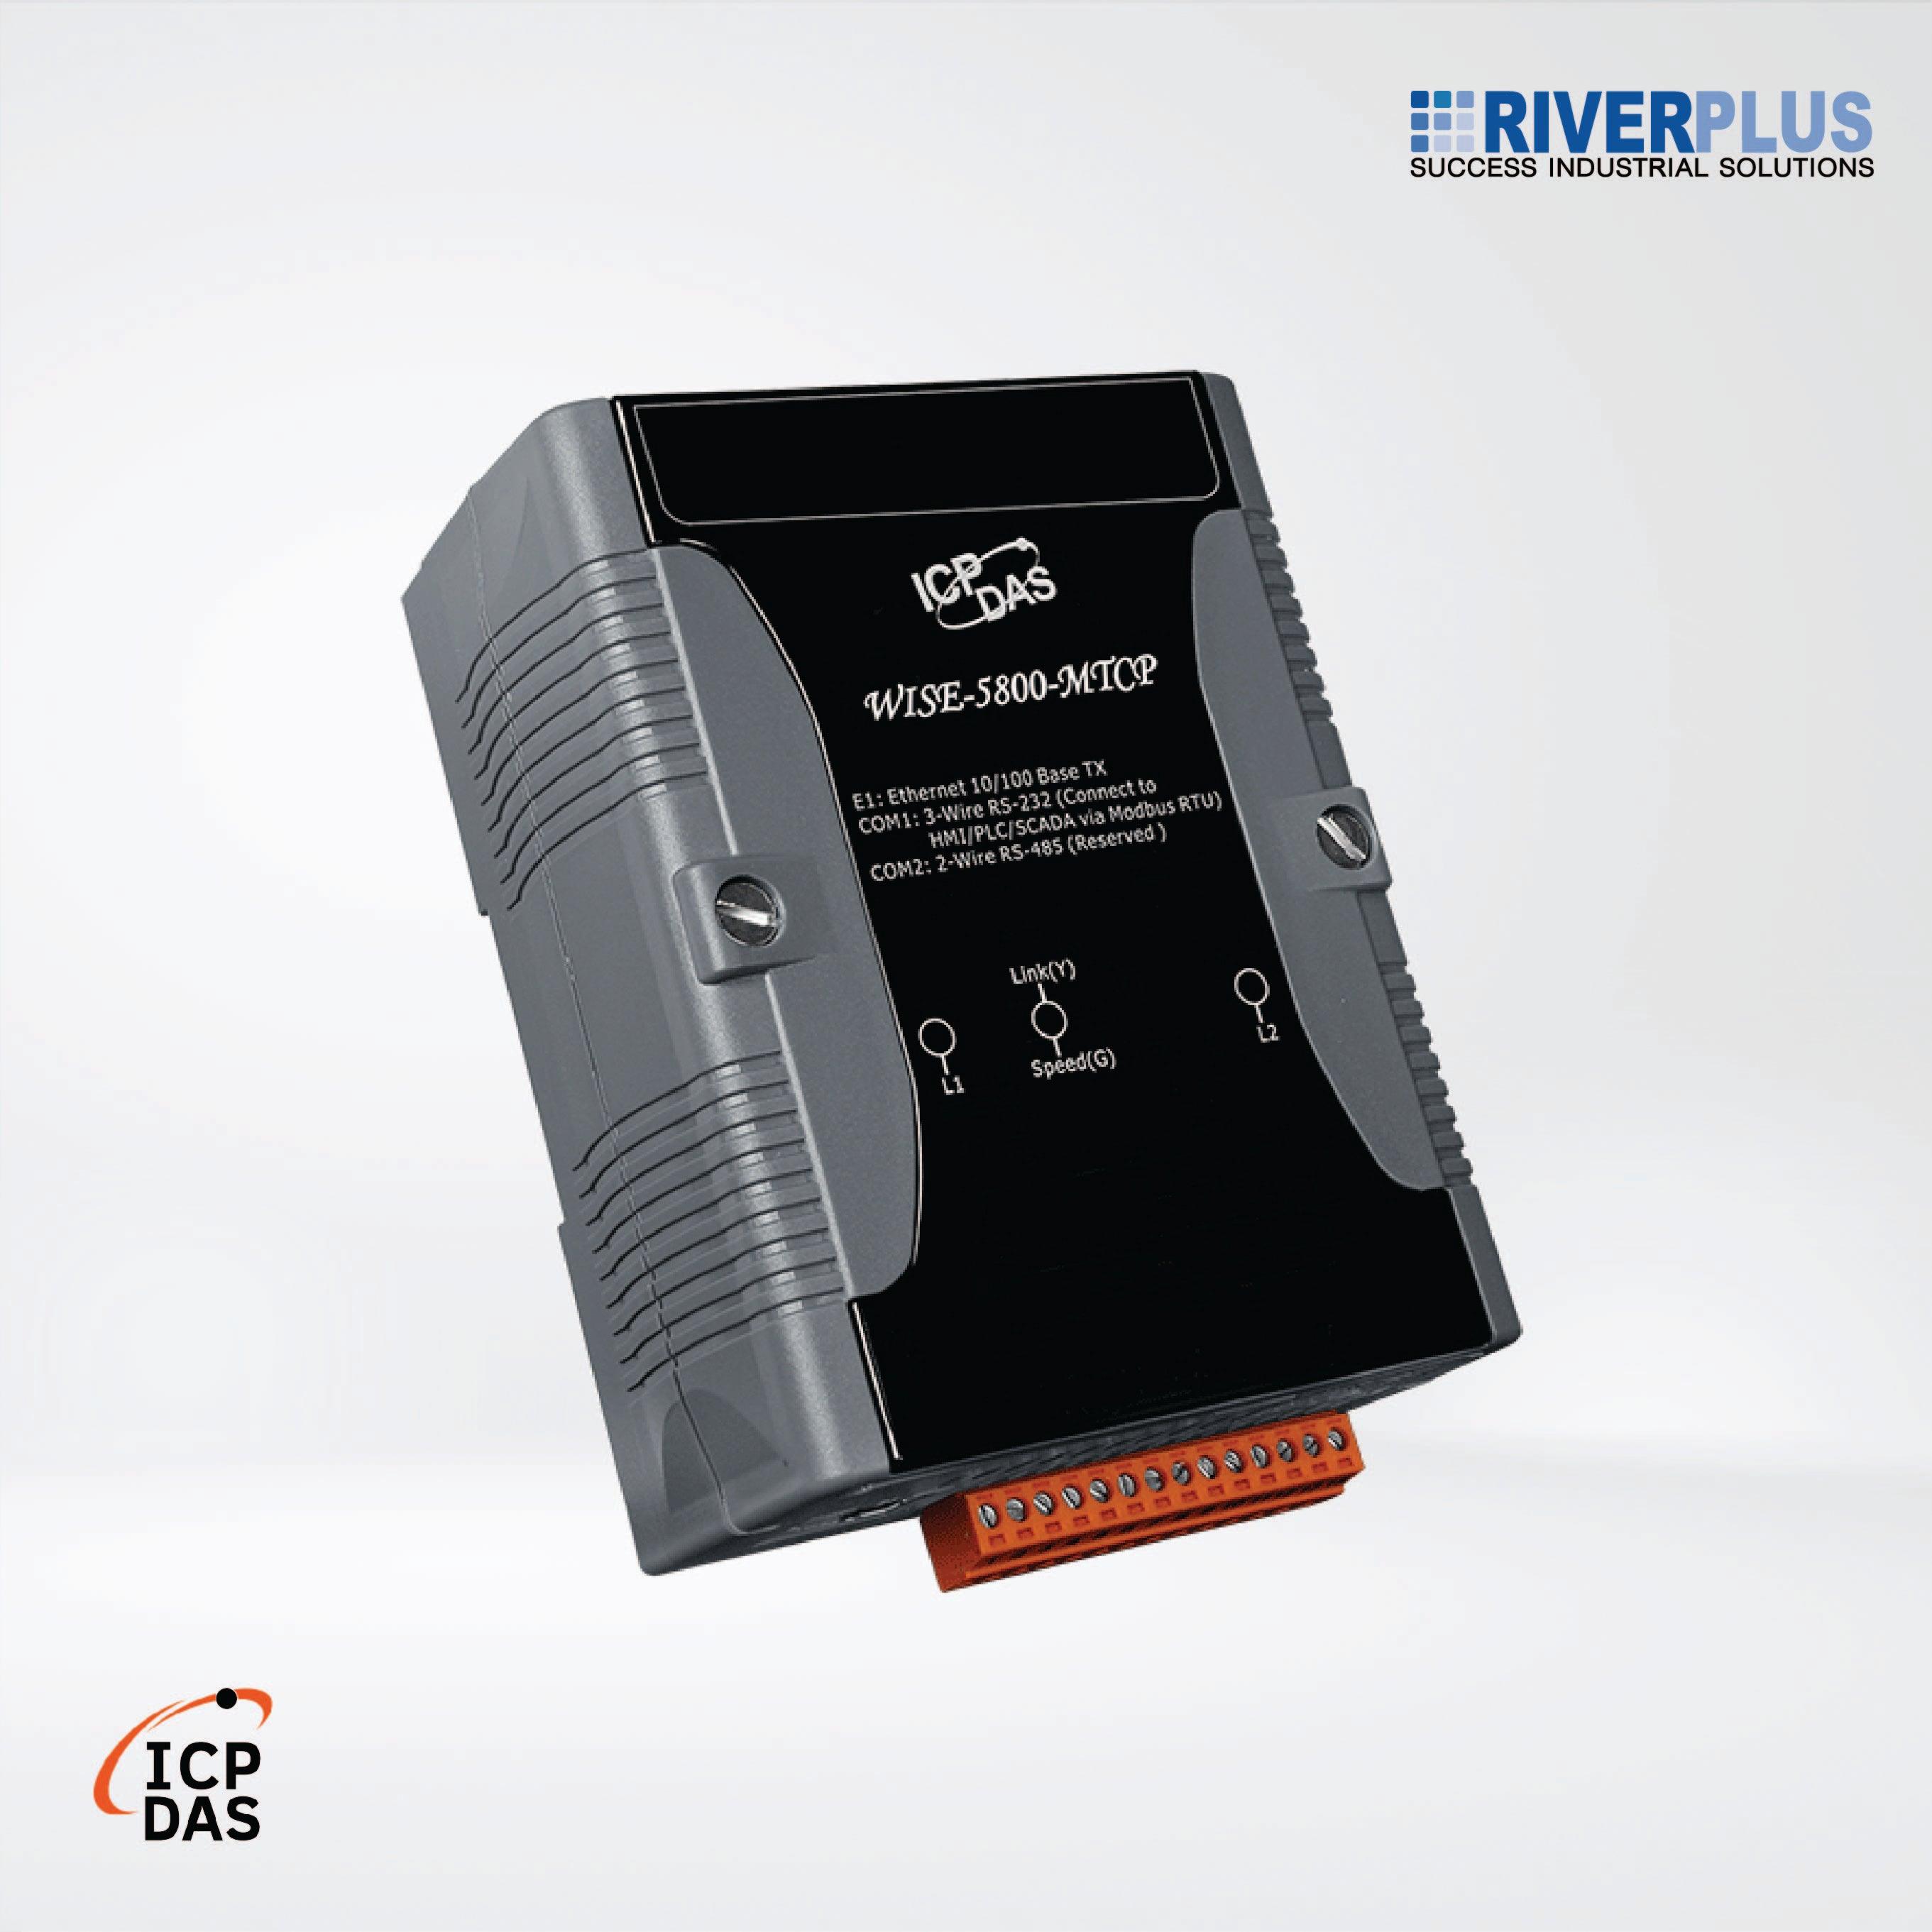 WISE-5800-MTCP Intelligent User-defined I/O & Data Log Module for Modbus TCP Devices - Riverplus